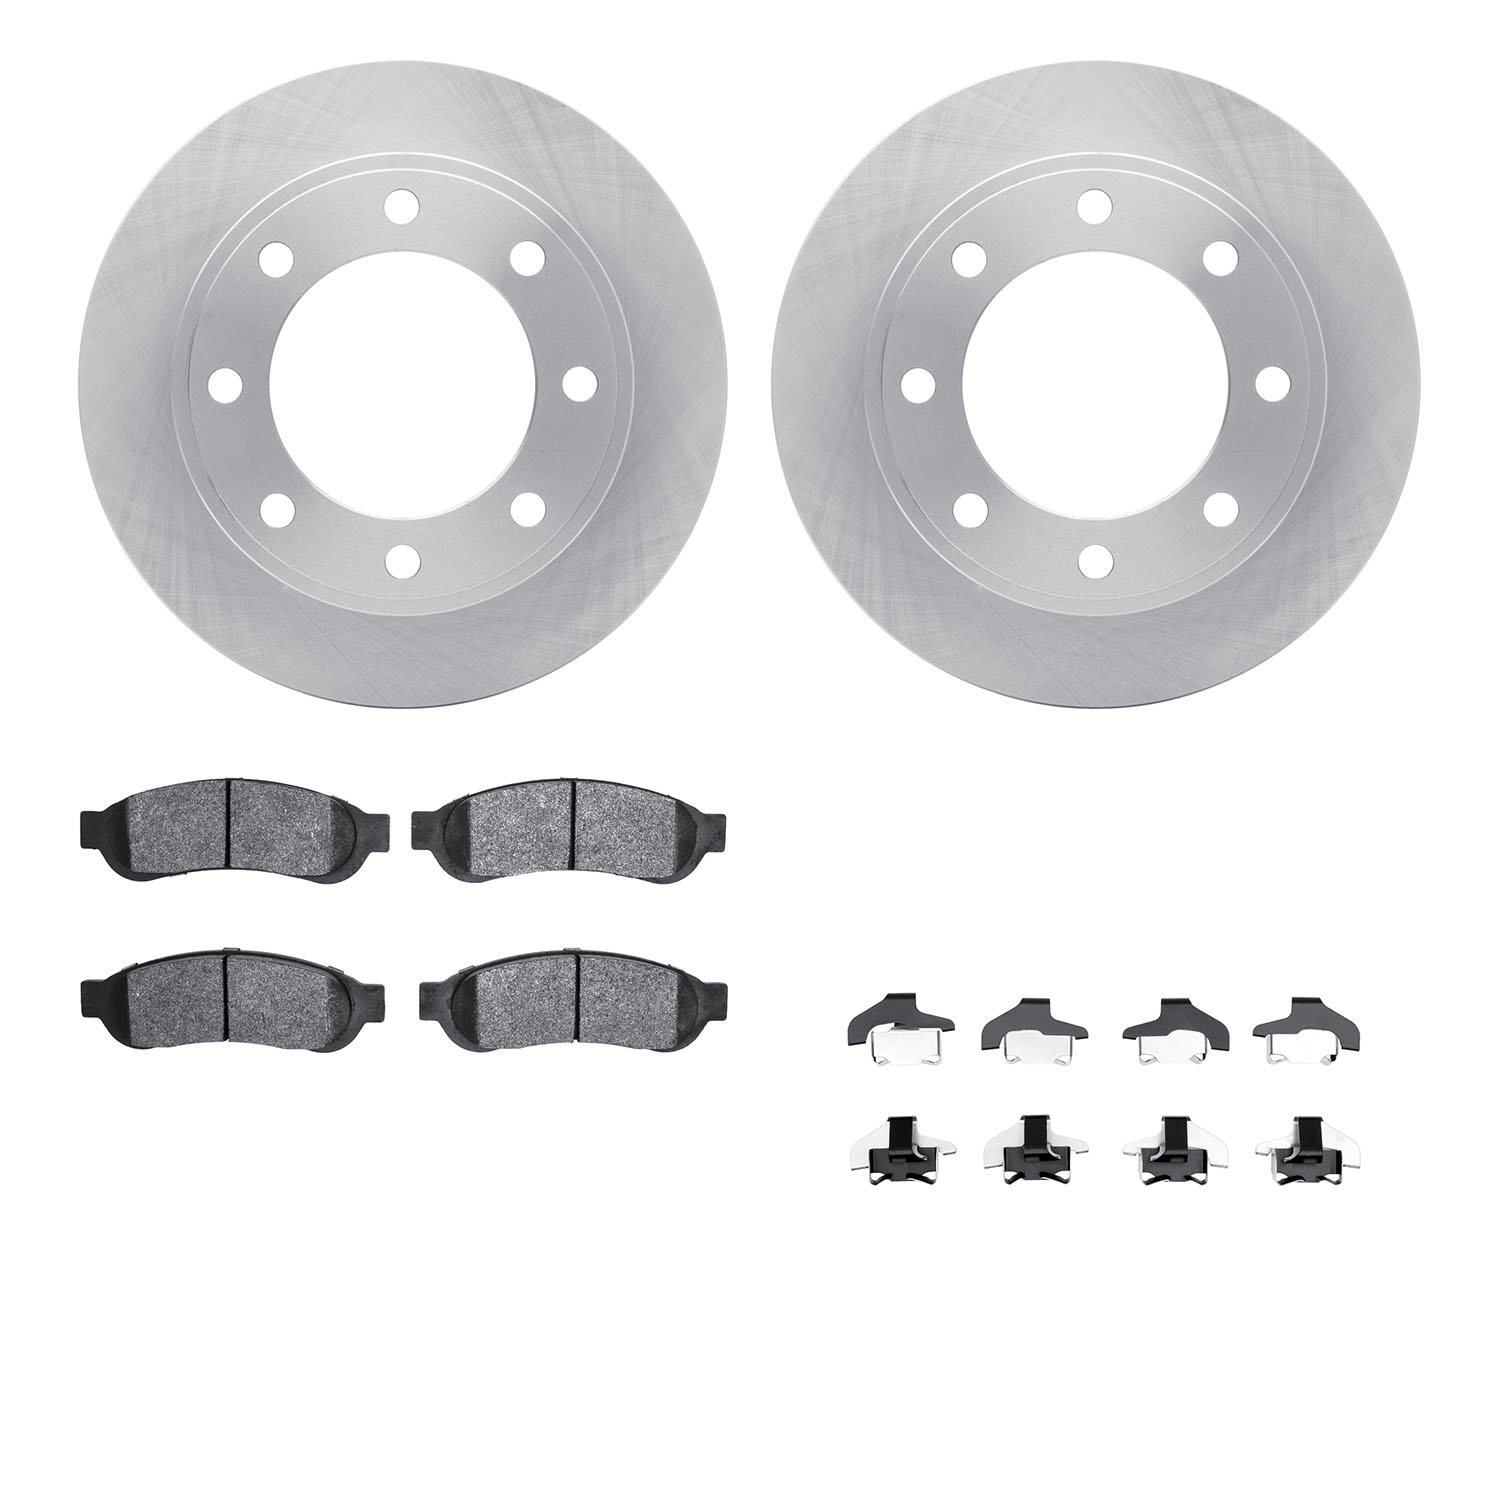 6412-54245 Brake Rotors with Ultimate-Duty Brake Pads Kit & Hardware, 2006-2010 Ford/Lincoln/Mercury/Mazda, Position: Rear